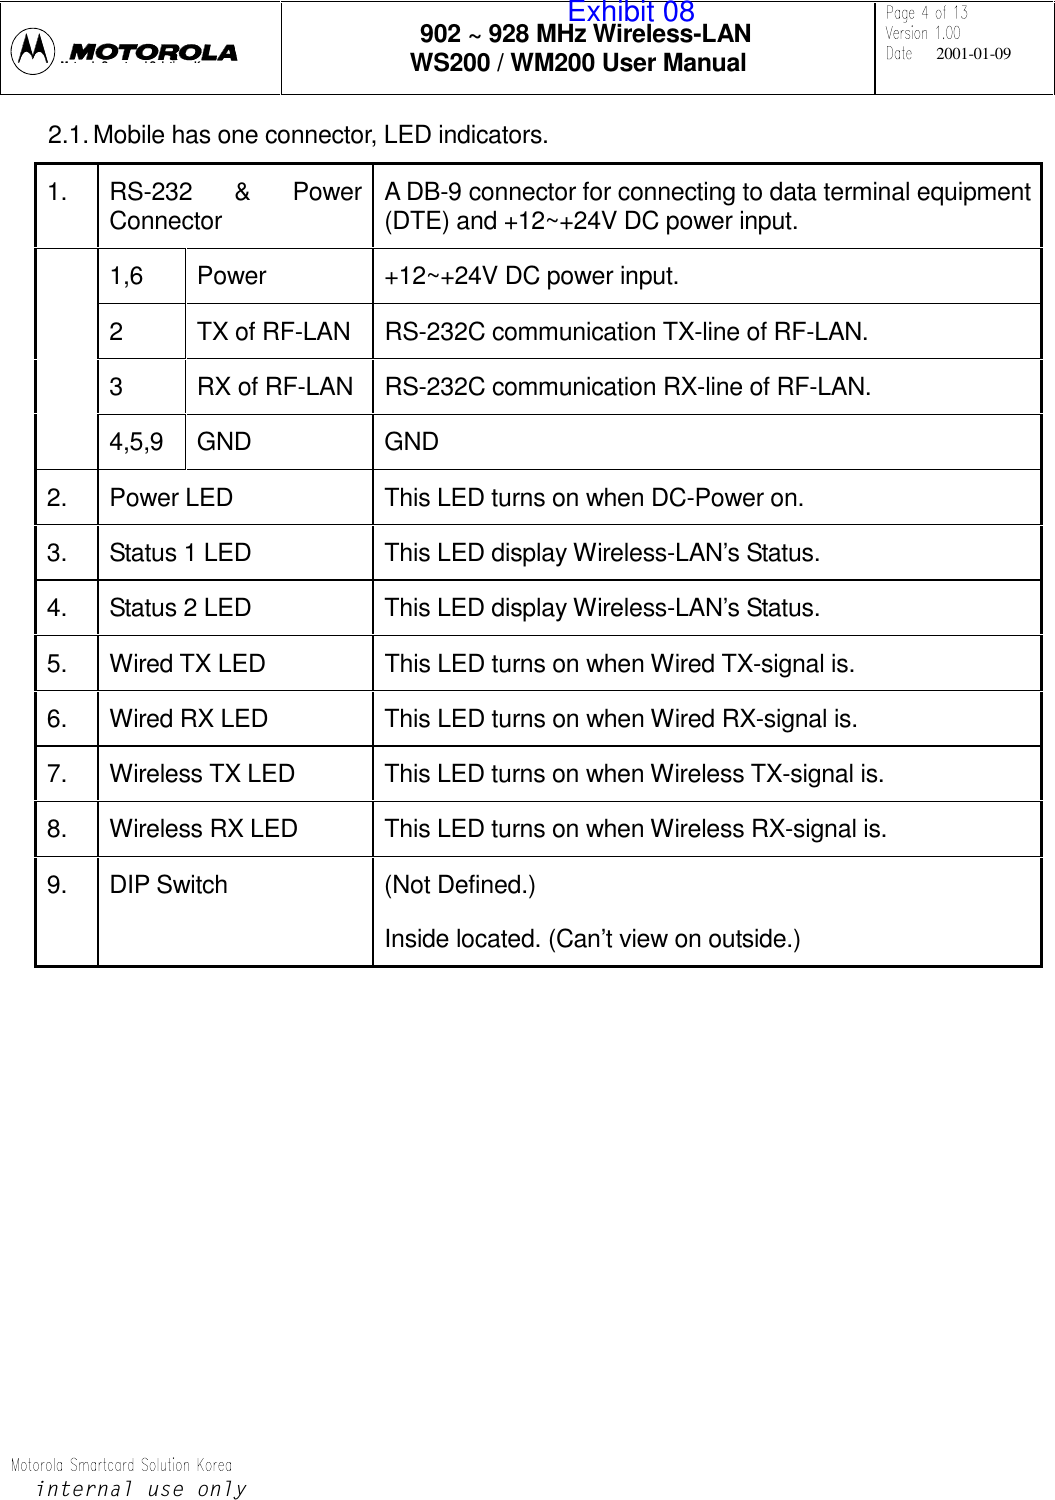 902 ~ 928 MHz Wireless-LANWS200 / WM200 User Manual 2001-01-09LQWHUQDOXVHRQO\Mt l S t dSlti K2.1. Mobile has one connector, LED indicators.1. RS-232 &amp; PowerConnector A DB-9 connector for connecting to data terminal equipment(DTE) and +12~+24V DC power input.1,6 Power +12~+24V DC power input.2 TX of RF-LAN RS-232C communication TX-line of RF-LAN.3 RX of RF-LAN RS-232C communication RX-line of RF-LAN.4,5,9 GND GND2. Power LED This LED turns on when DC-Power on.3. Status 1 LED This LED display Wireless-LAN’s Status.4. Status 2 LED This LED display Wireless-LAN’s Status.5. Wired TX LED This LED turns on when Wired TX-signal is.6. Wired RX LED This LED turns on when Wired RX-signal is.7. Wireless TX LED This LED turns on when Wireless TX-signal is.8. Wireless RX LED This LED turns on when Wireless RX-signal is.9. DIP Switch (Not Defined.)Inside located. (Can’t view on outside.)Exhibit 08